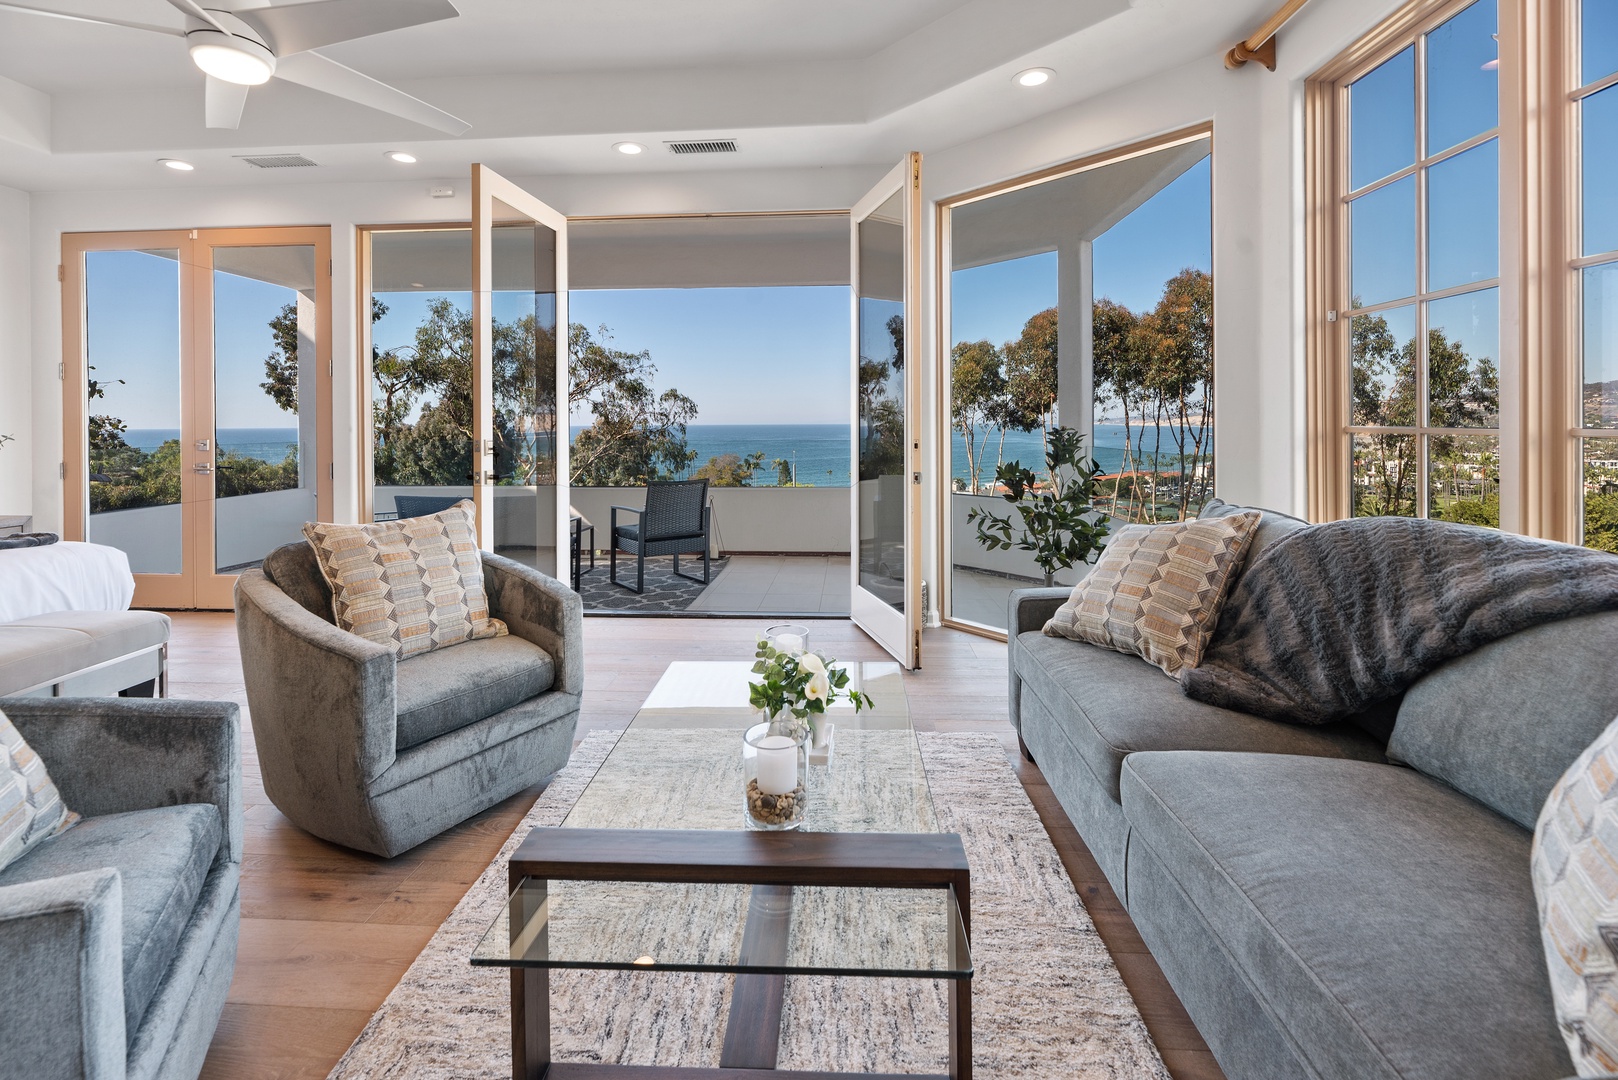 La Jolla Vacation Rentals, Coastal Lookout - Seating area of the Primary bedroom wtih full ocean view